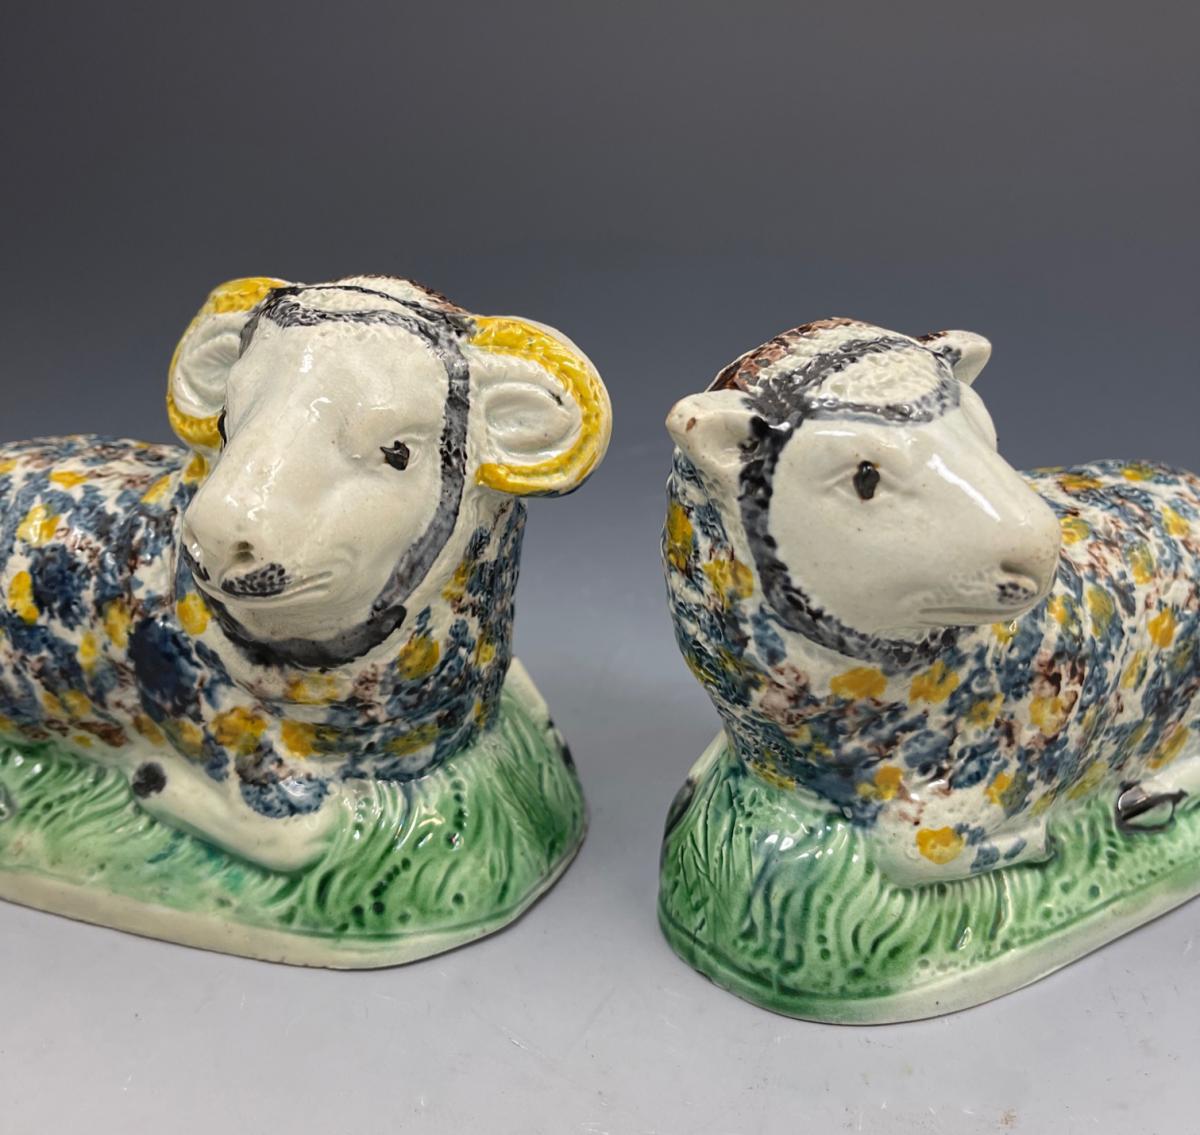 Pair of pottery figures a Ram and Ewe underglaze oxide decoration late 18th century